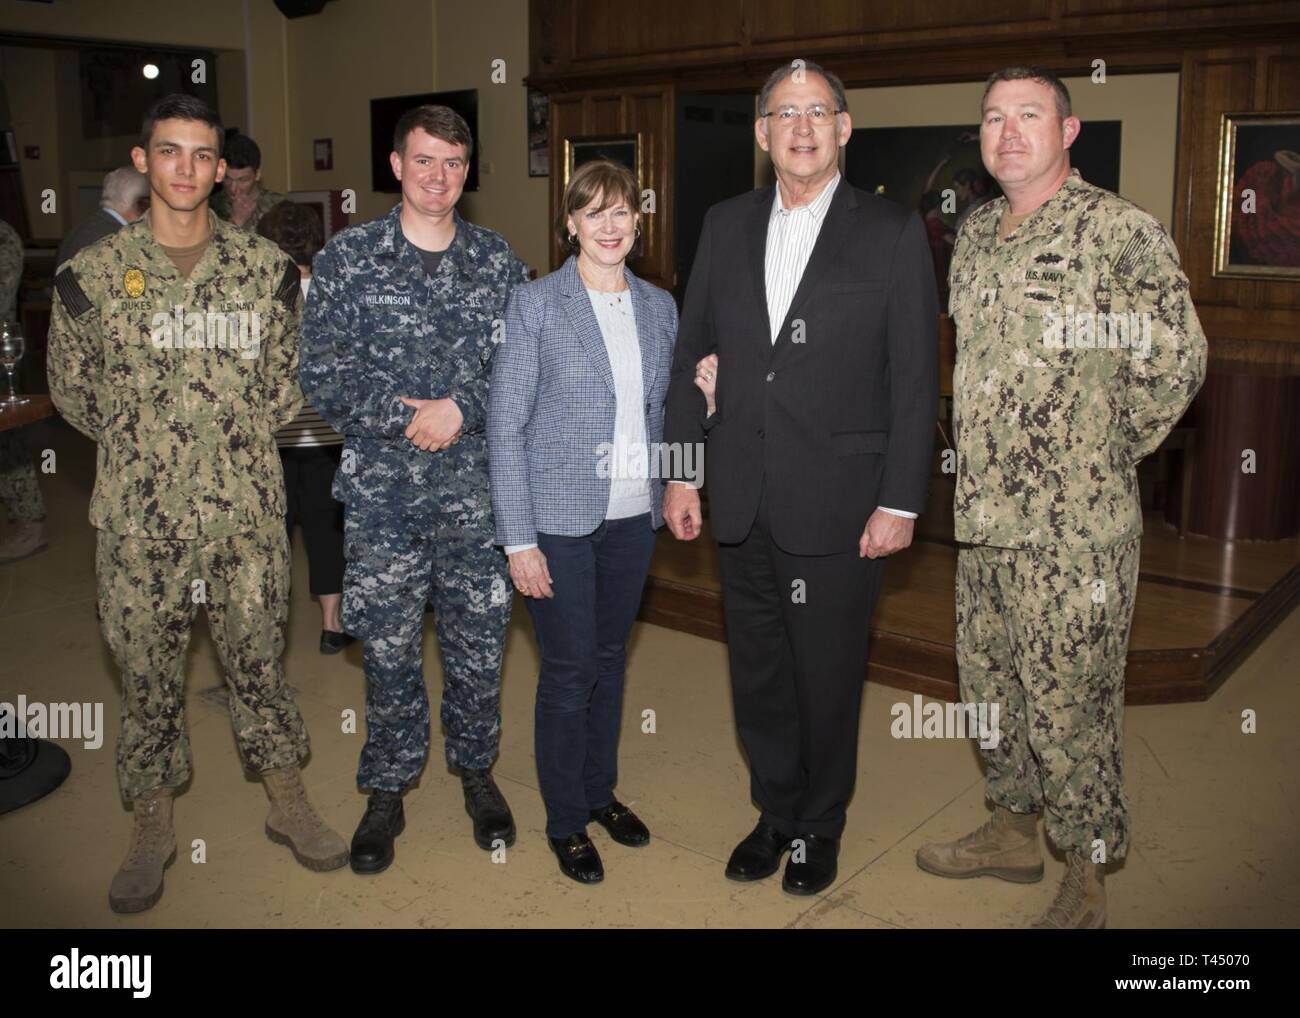 NAVAL STATION ROTA, Spain (February 25, 2019) U.S. Senator (R-AR) John Boozman, center, and spouse Cathy Boozman, pose for a photo with Master-at-Arms Seaman Apprentice Daltyn Dukes, left, Electronics Technician 3rd Class Alex Wilkinson, and Senior Chief Constructionman Todd Maxwell, all from Arkansas, during a meet and greet with service members stationed aboard Naval Station (NAVSTA) Rota.. NAVSTA Rota sustains the fleet, enables the fighter and supports the family by conducting air operations, port operations, ensuring security and safety, assuring quality of life and providing the core ser Stock Photo